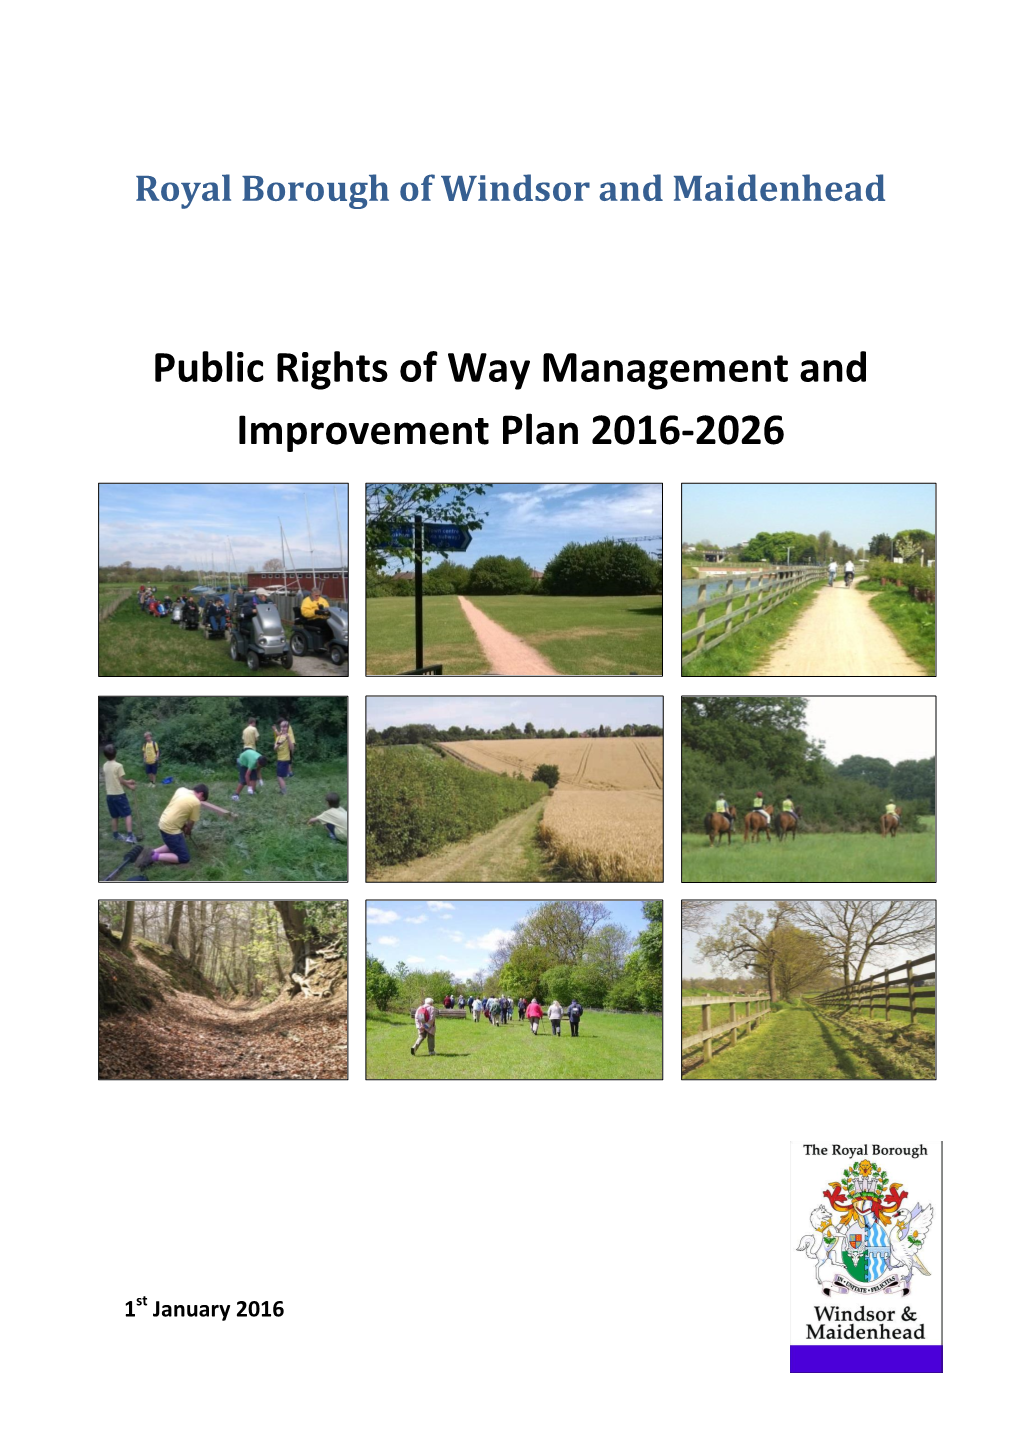 Public Rights of Way Management and Improvement Plan 2016-2026